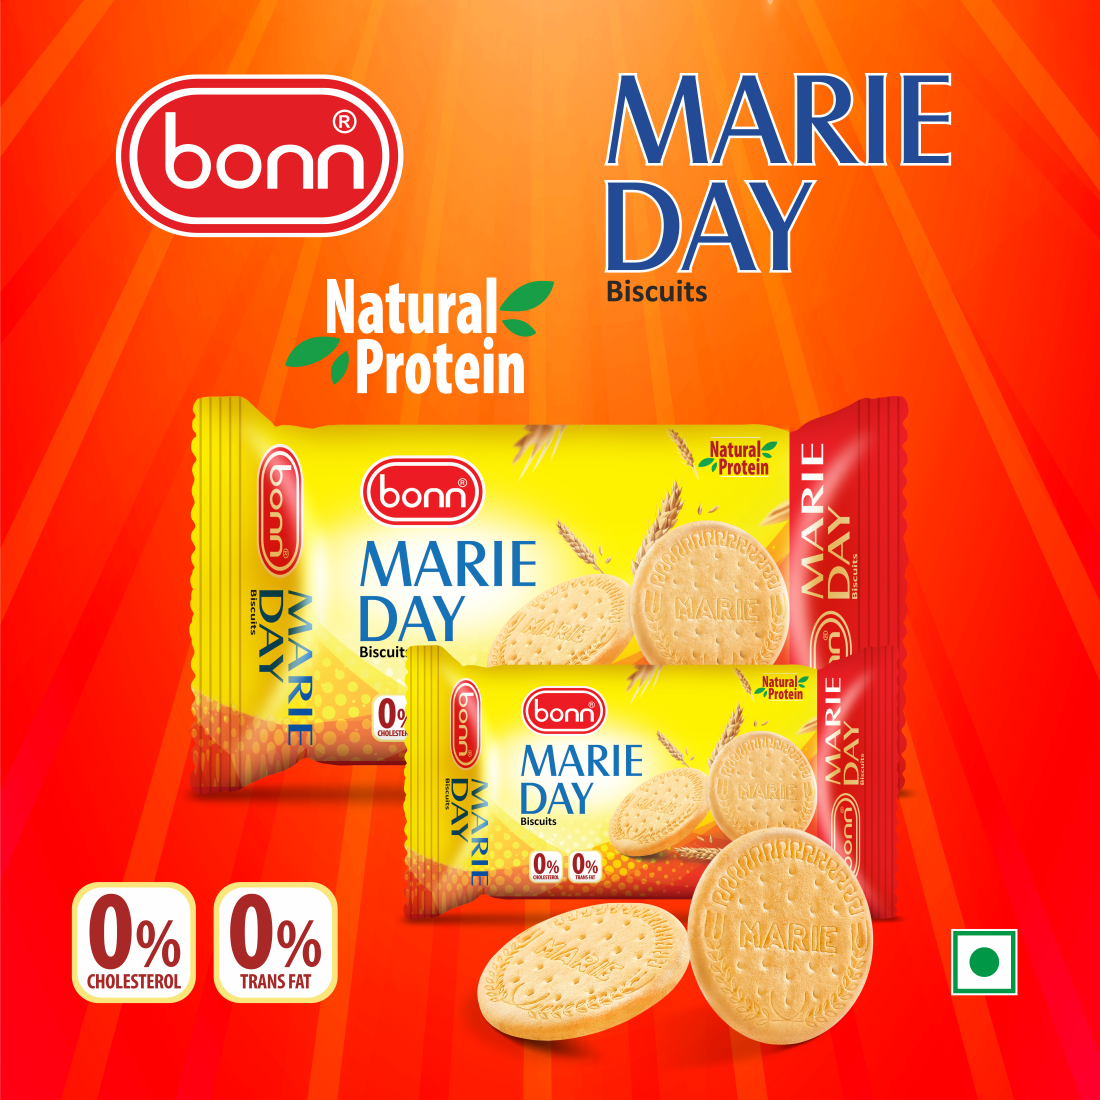 Bonn Marie Day Biscuits, Cholestro Free, TransFat Free, Natural Protein, 40 g Pack